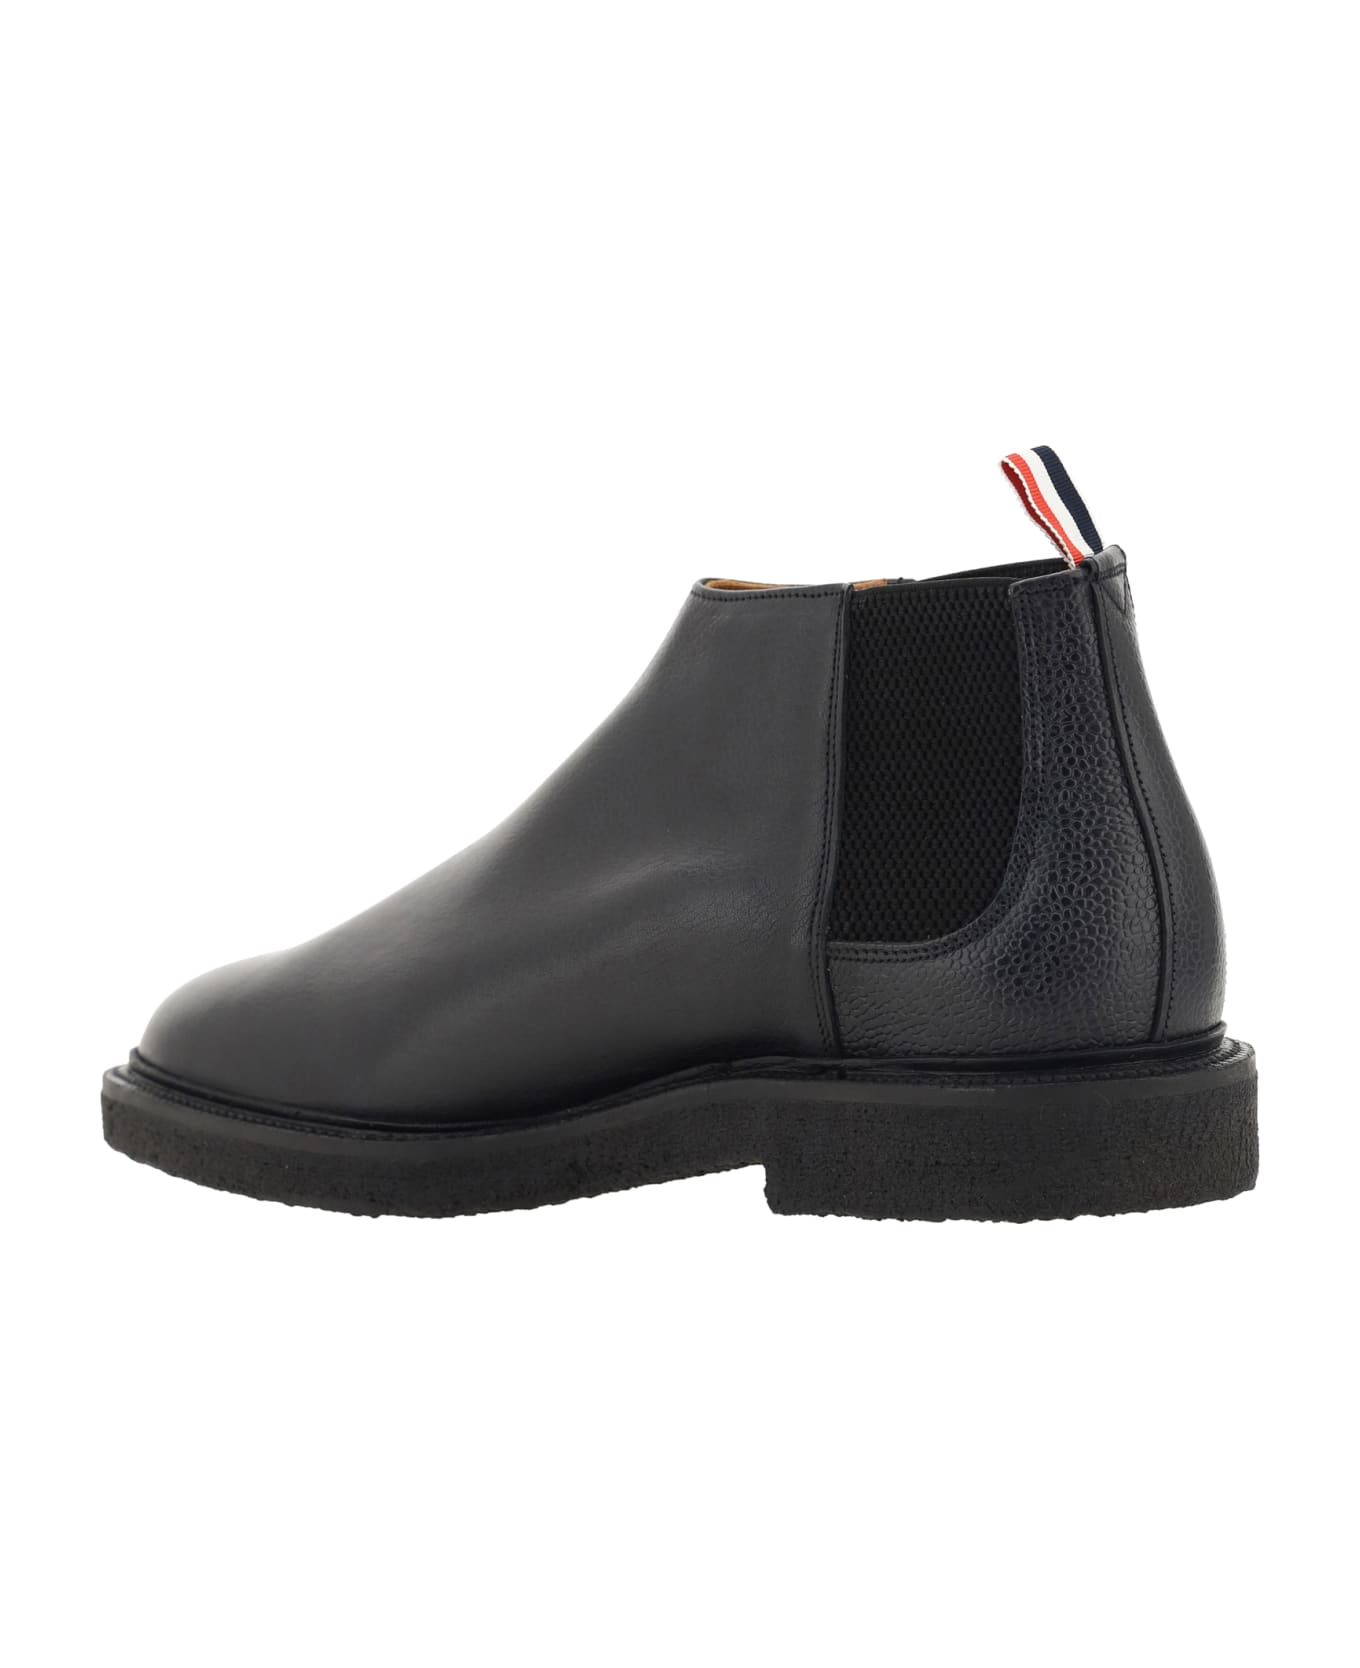 Thom Browne Ankle Boots - Black ブーツ